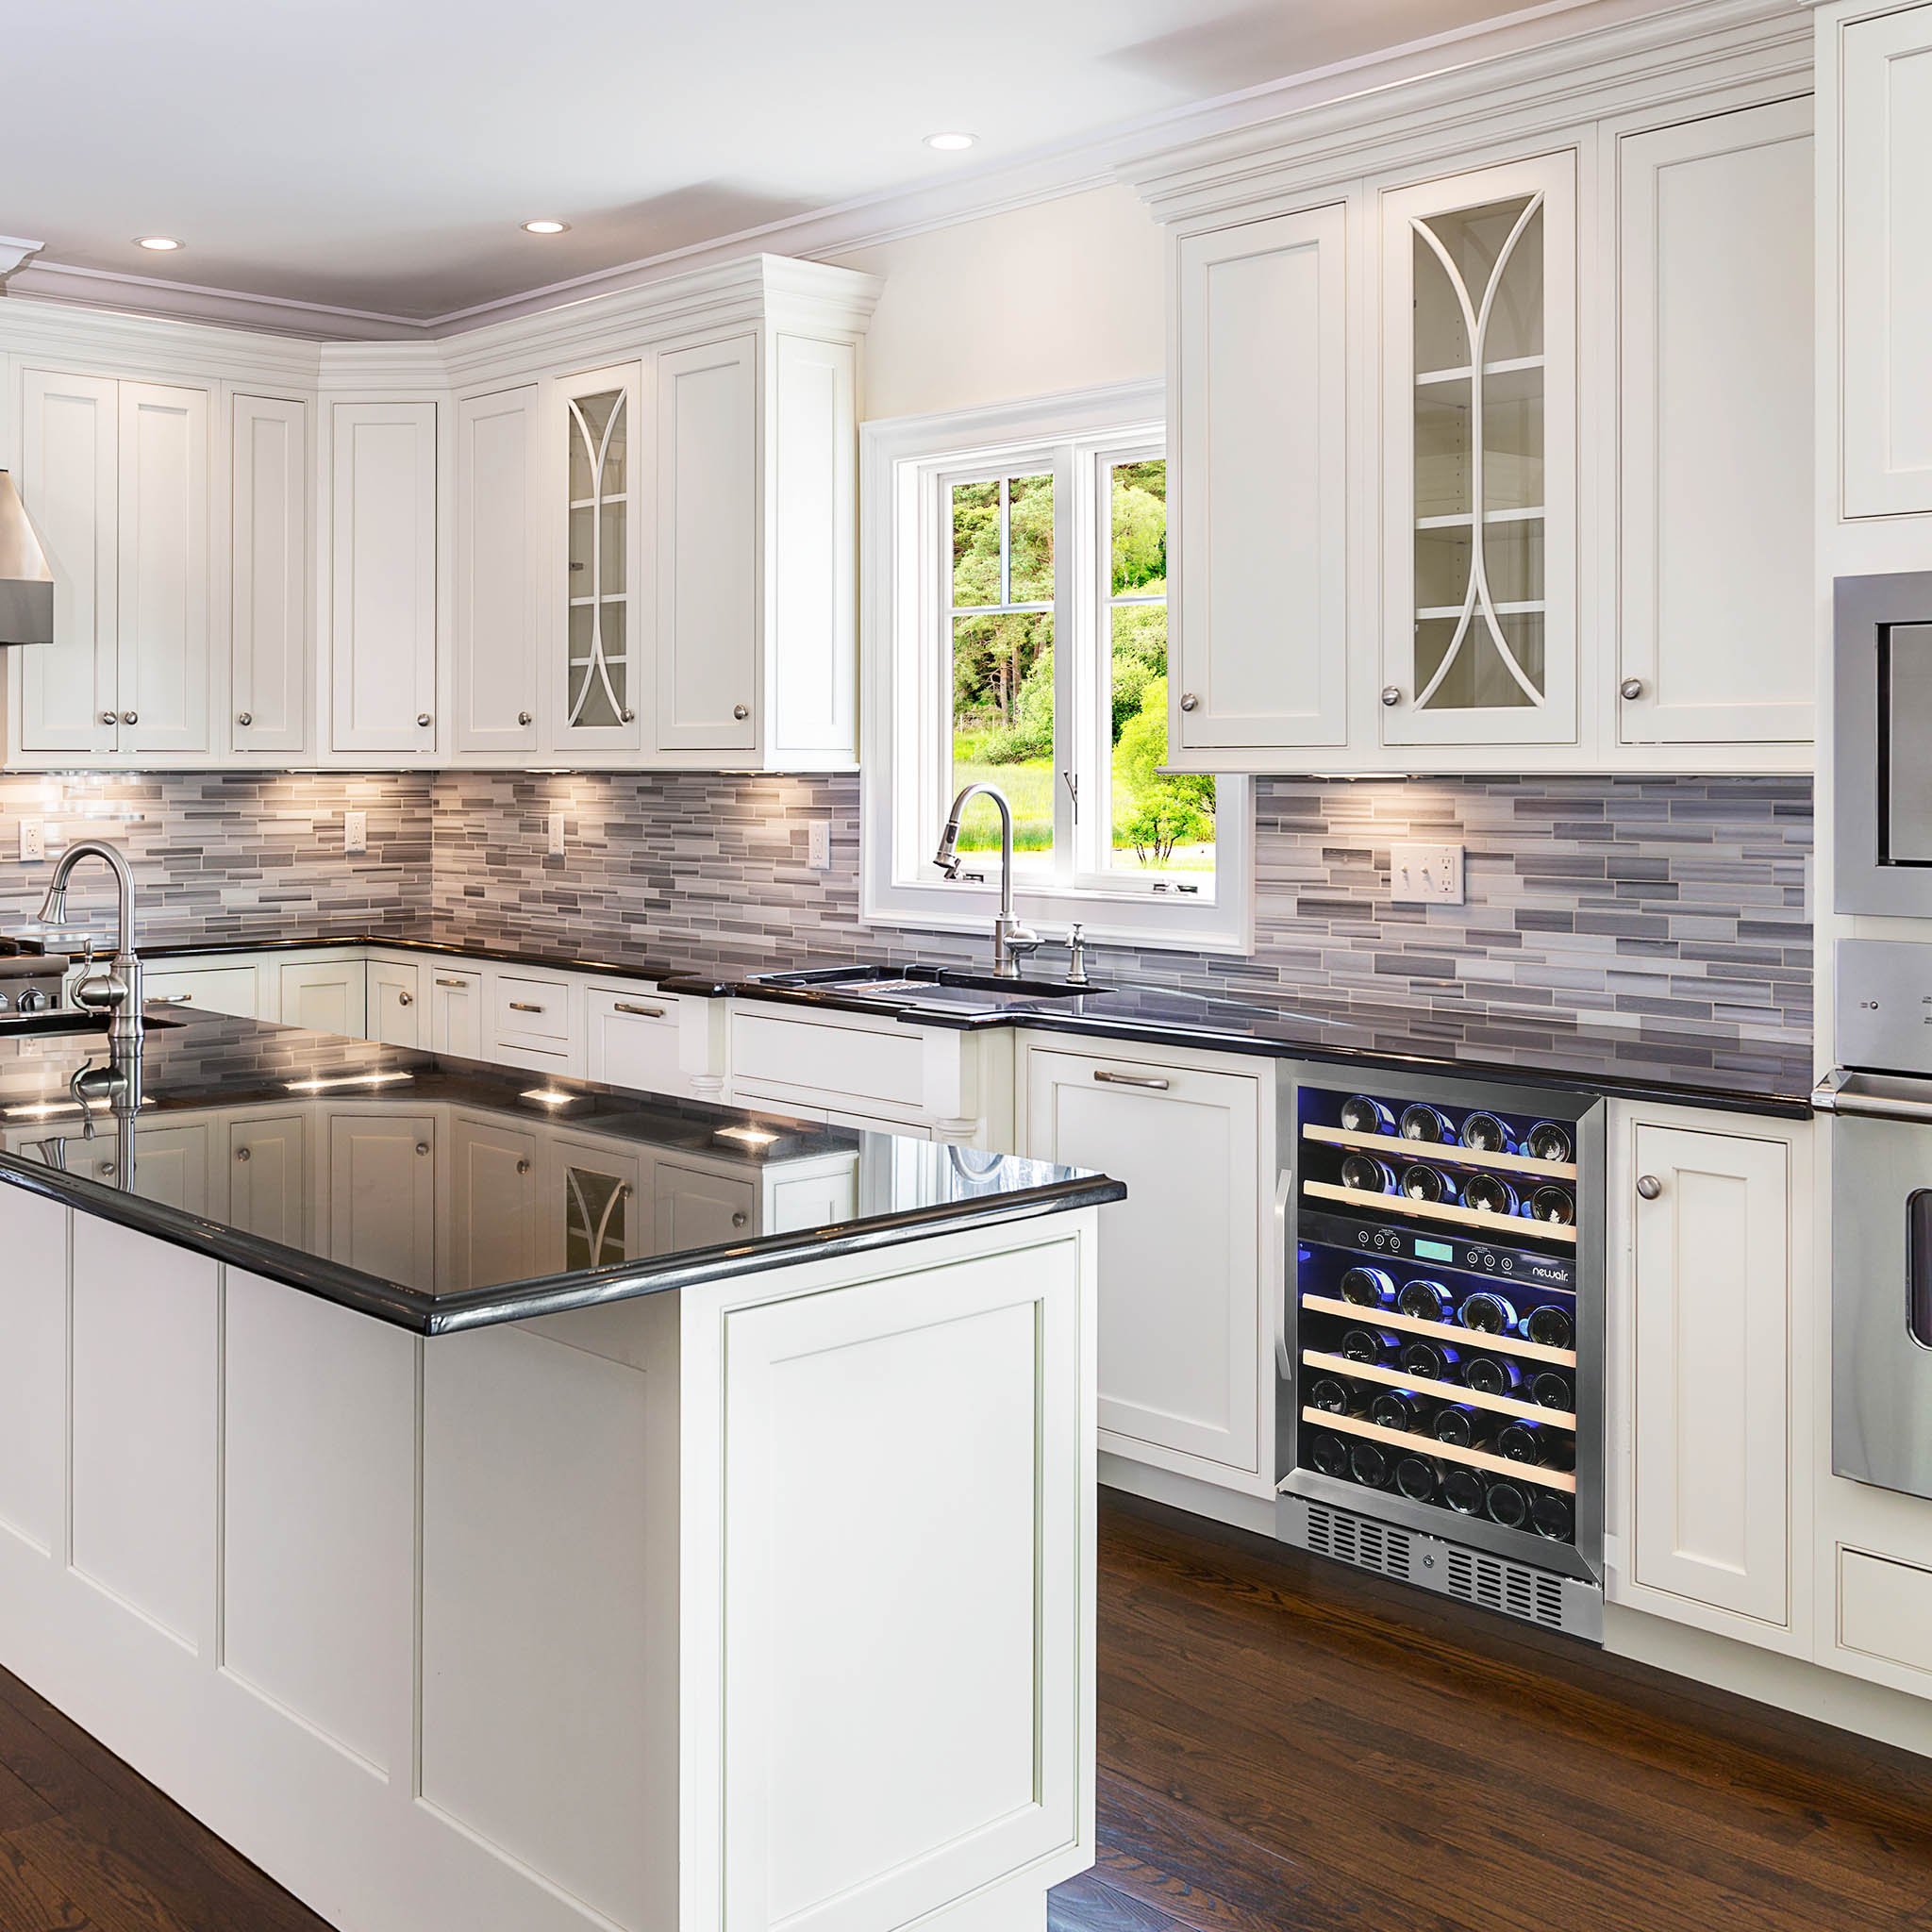 10 Best Kitchen Remodeling Ideas To Renovate Your Kitchen | Foyr